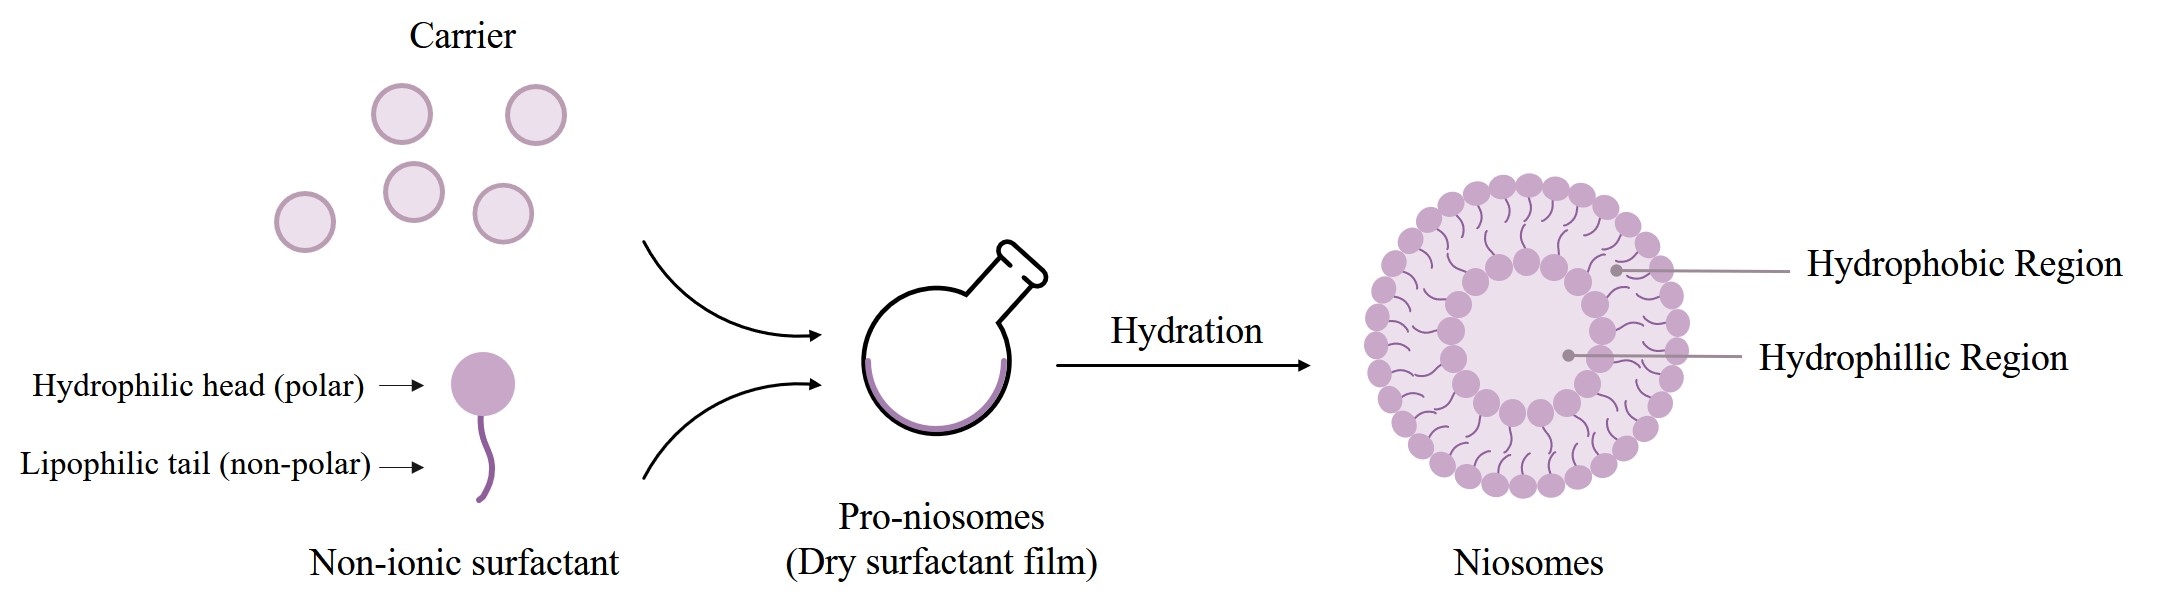 Fig.1 Niosomes formation from PNs by hydration. (Creative Biolabs Original)